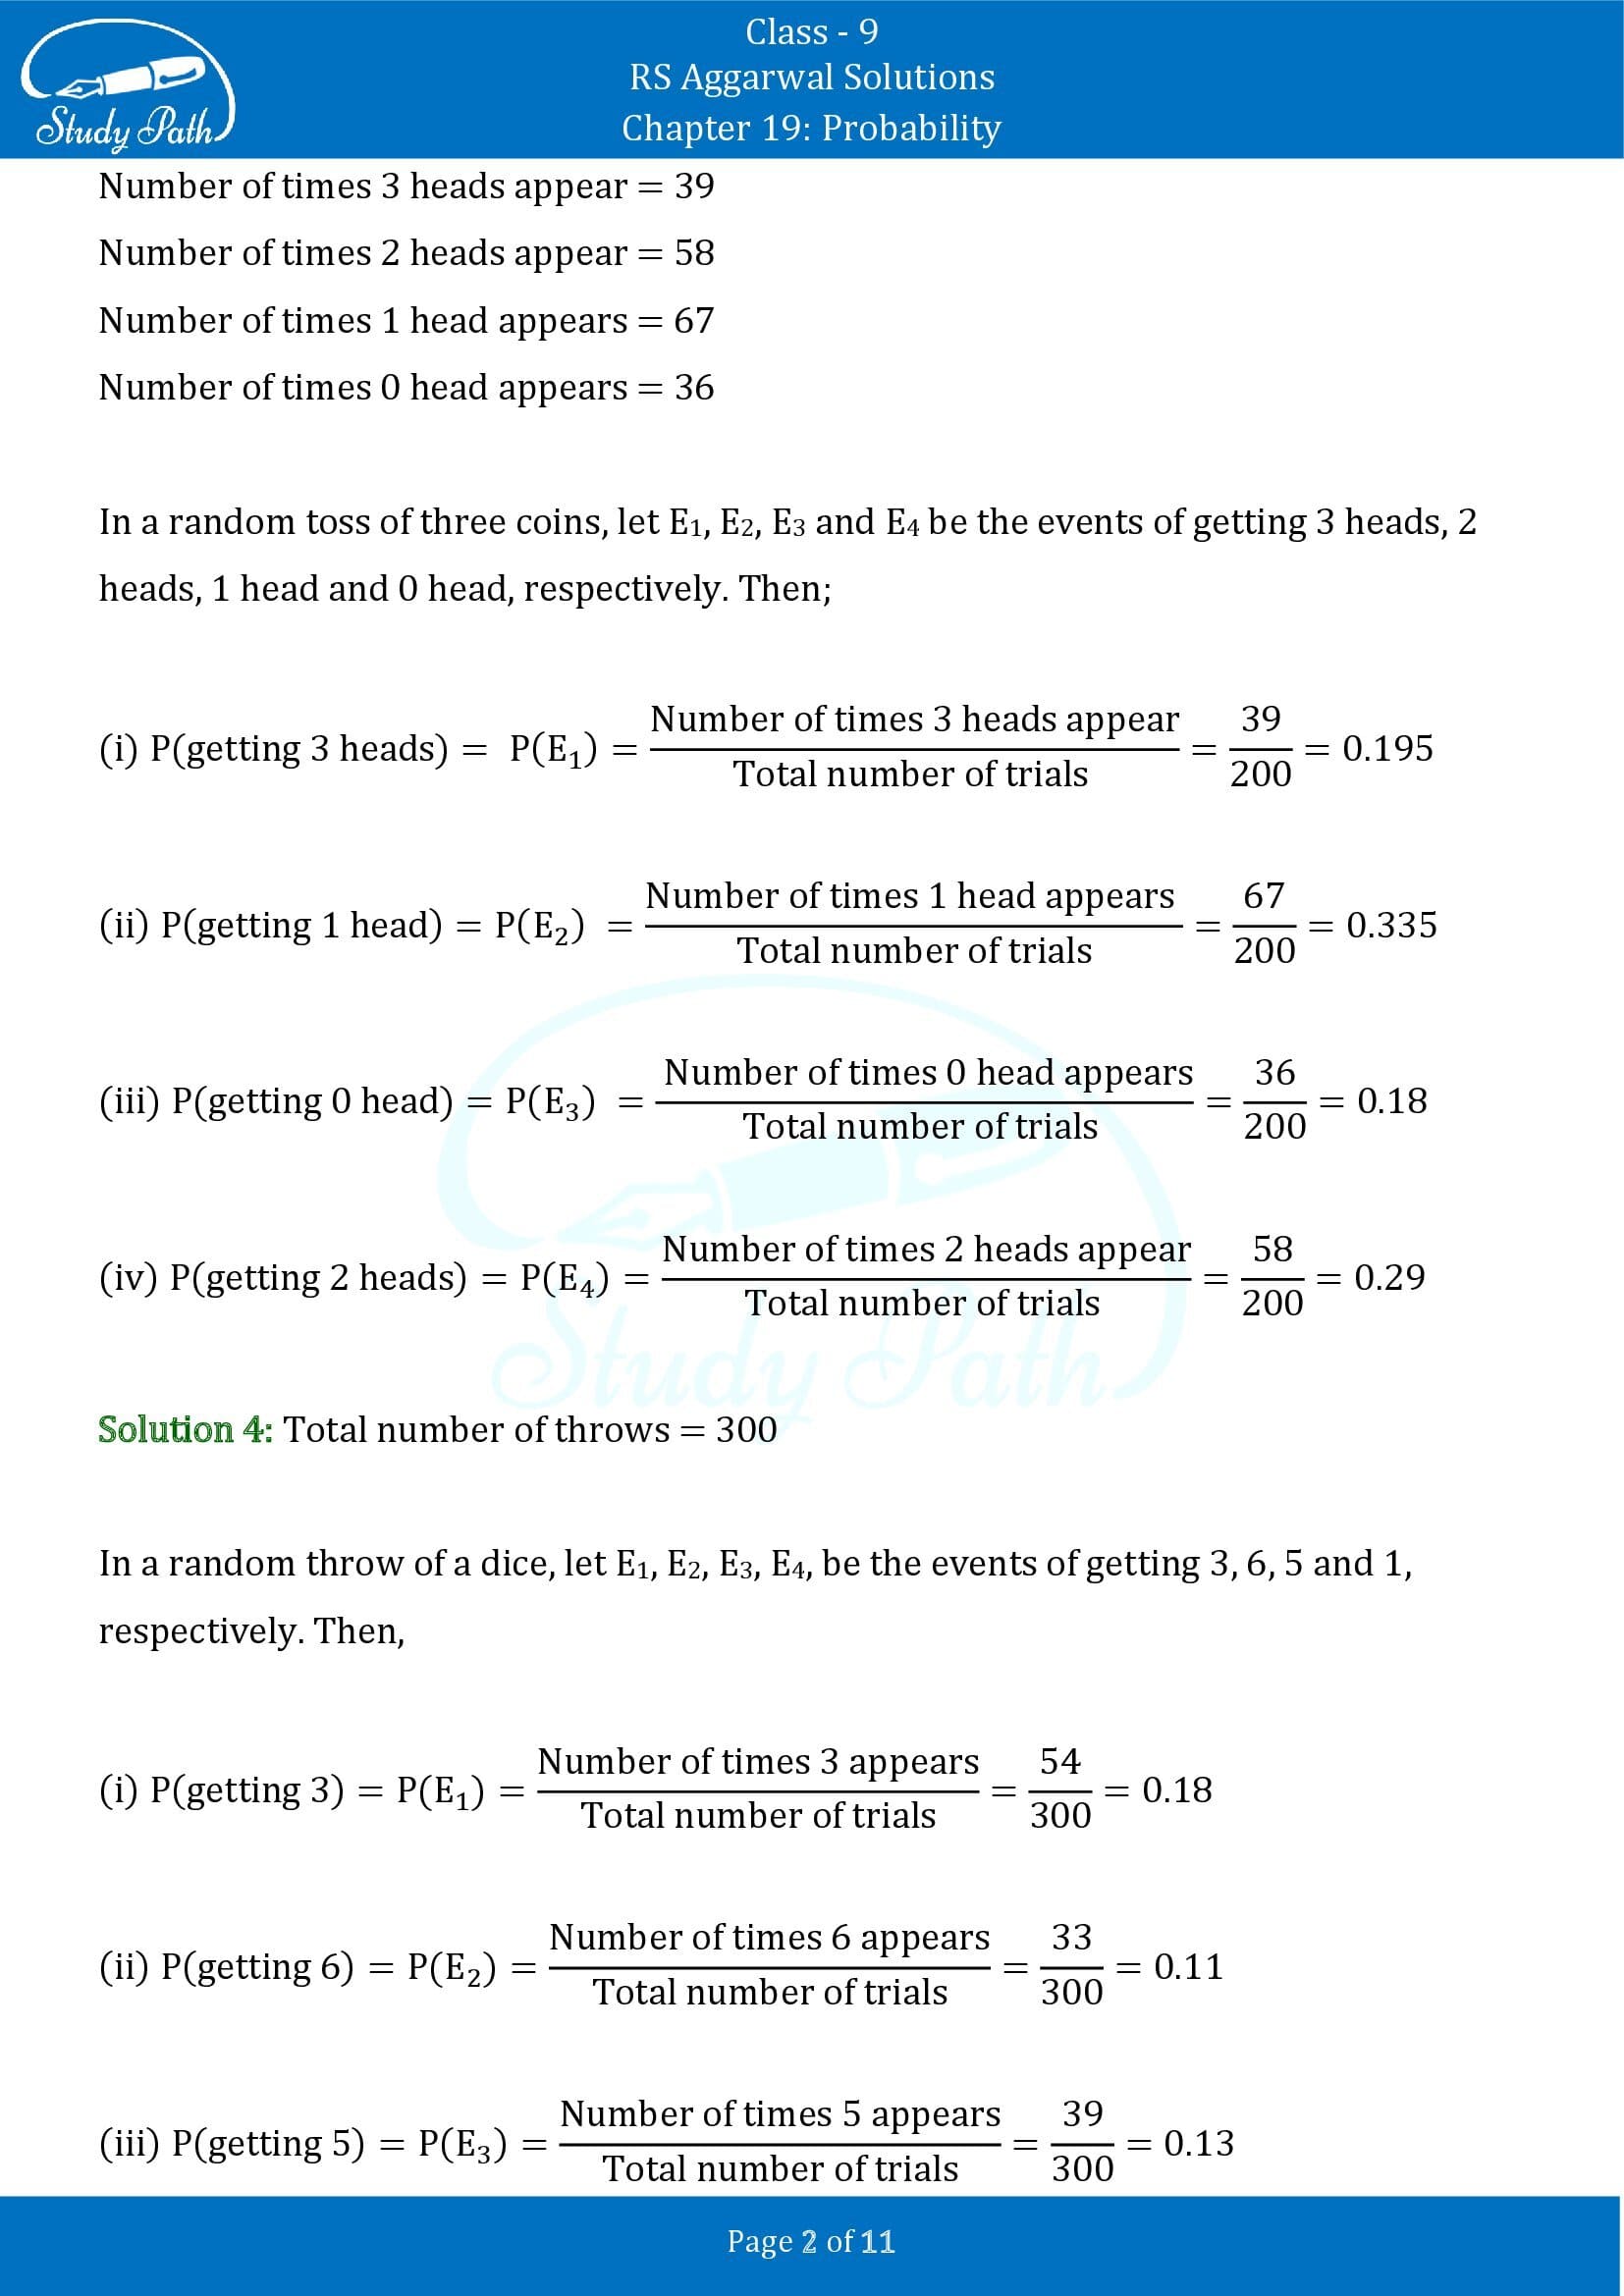 RS Aggarwal Solutions Class 9 Chapter 19 Probability Exercise 19 00002